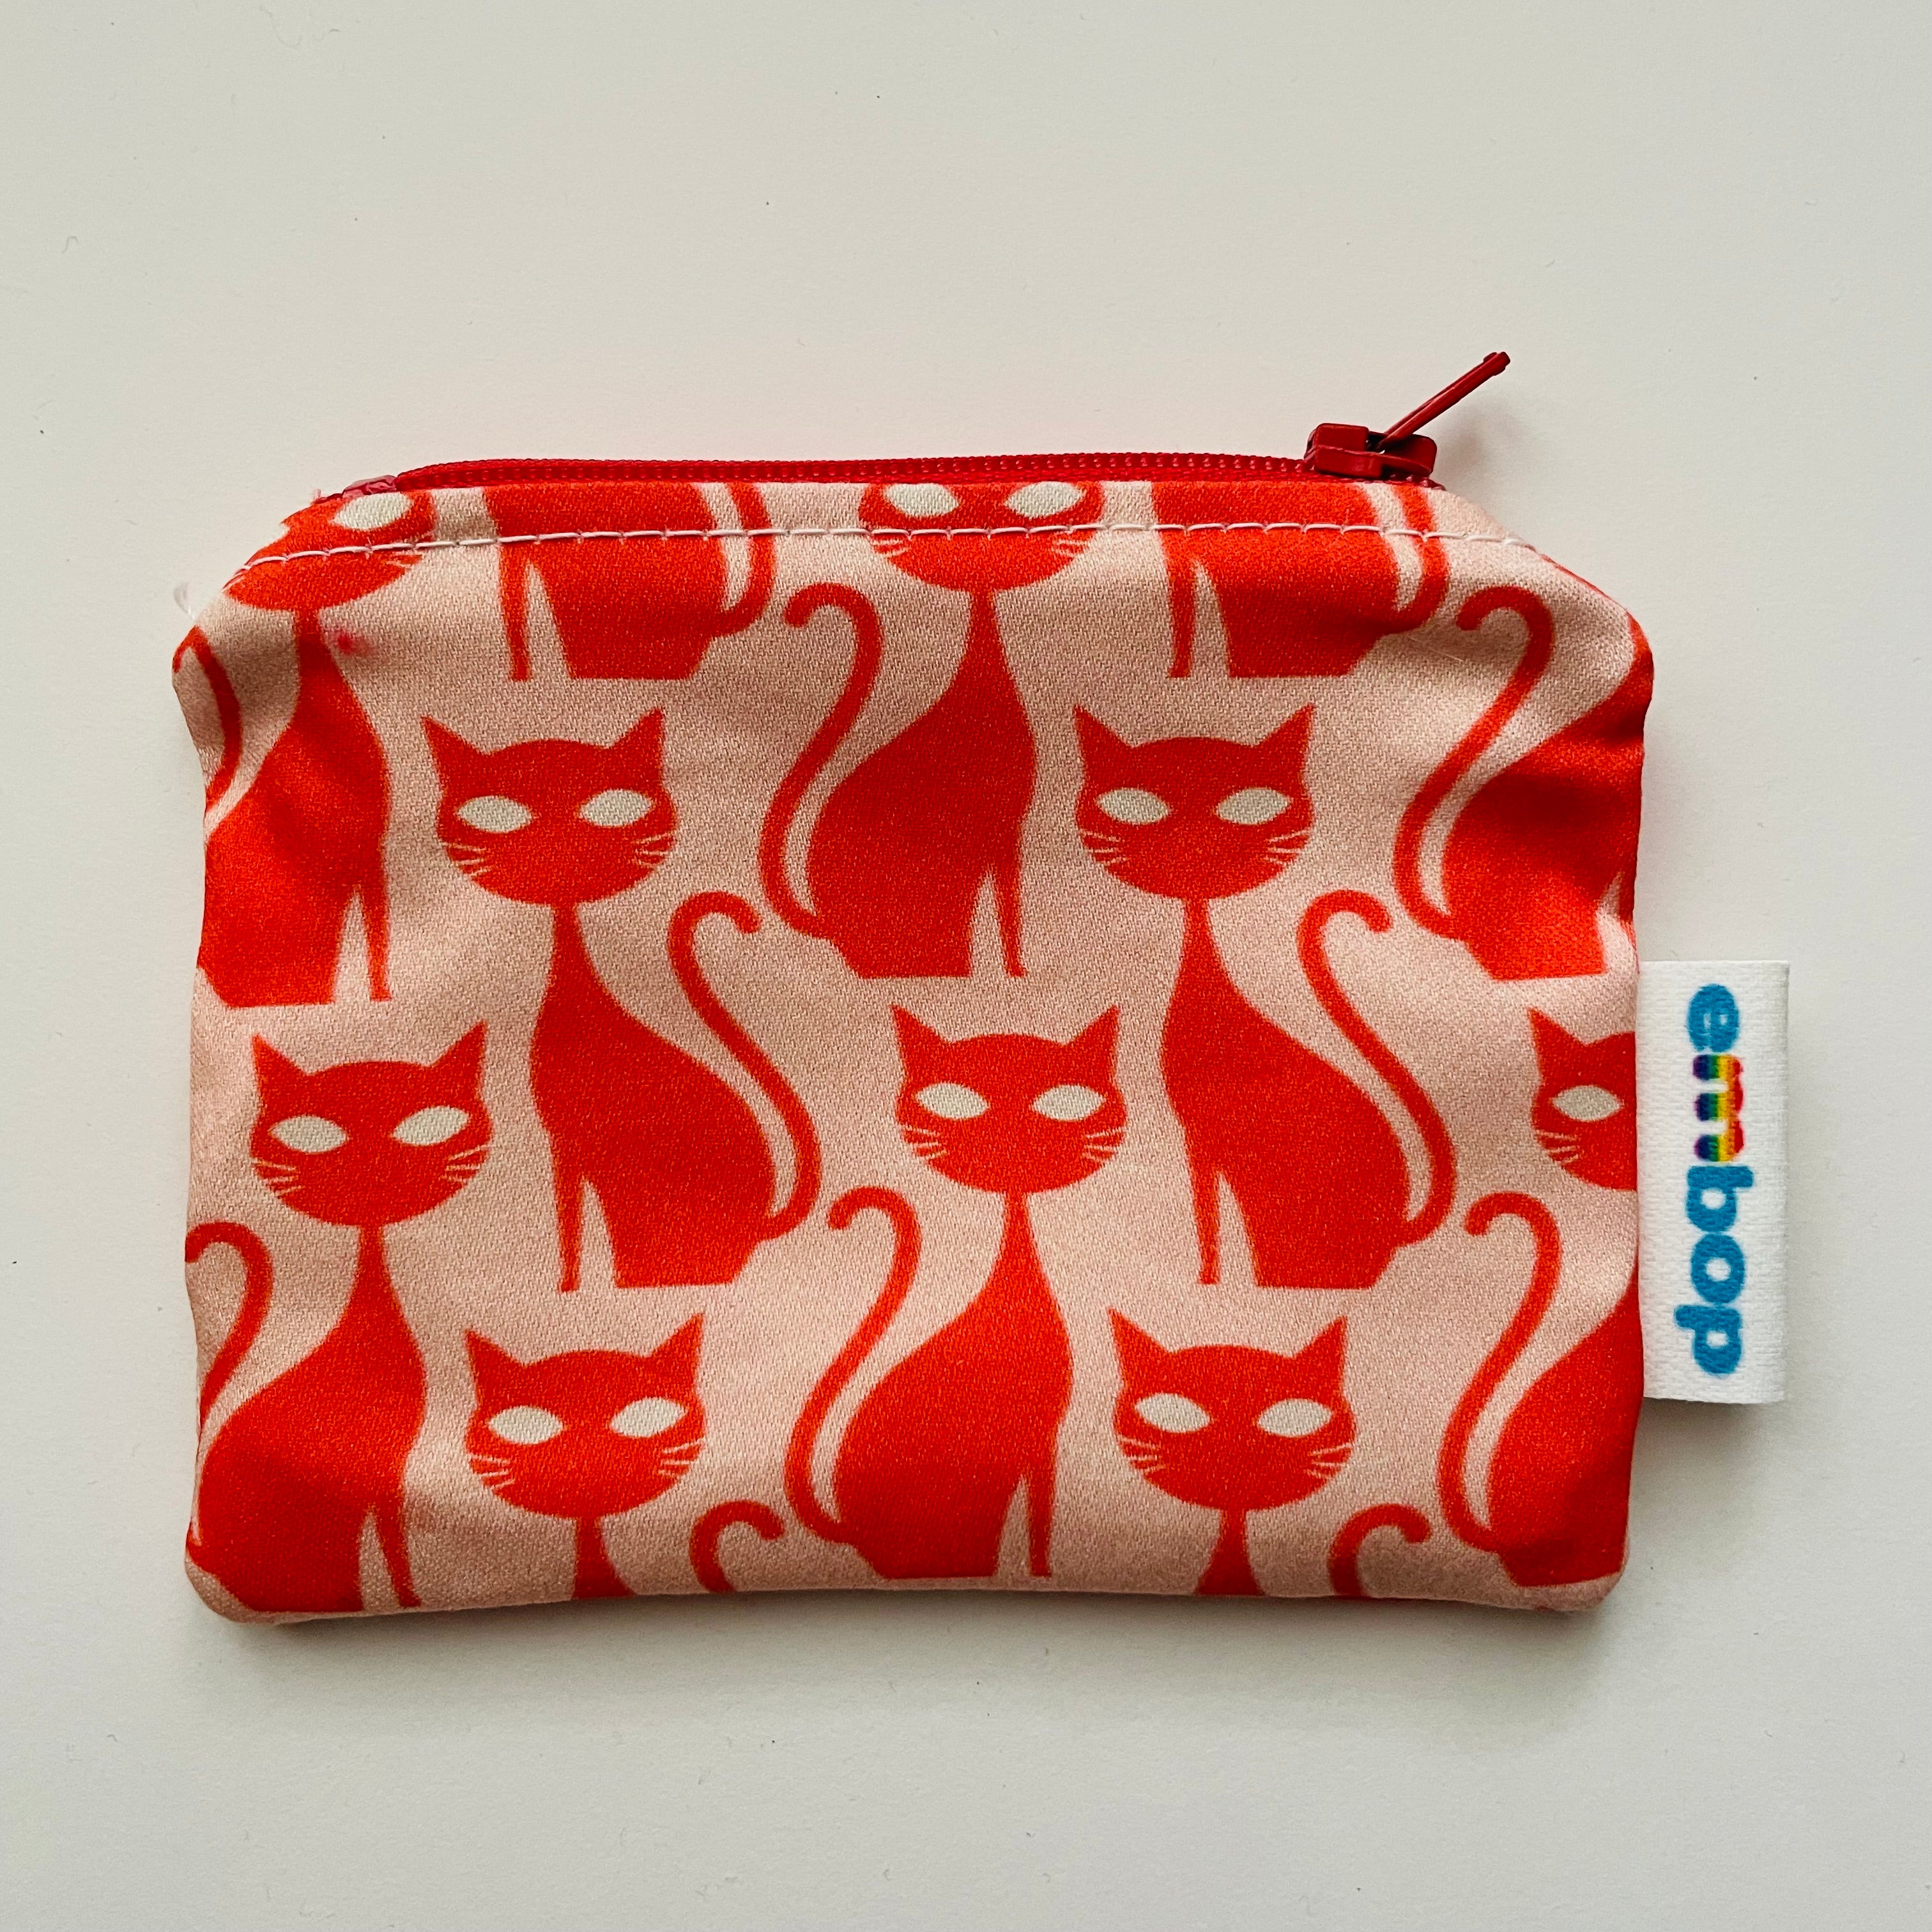 Product picture of Organic Cotton Purse